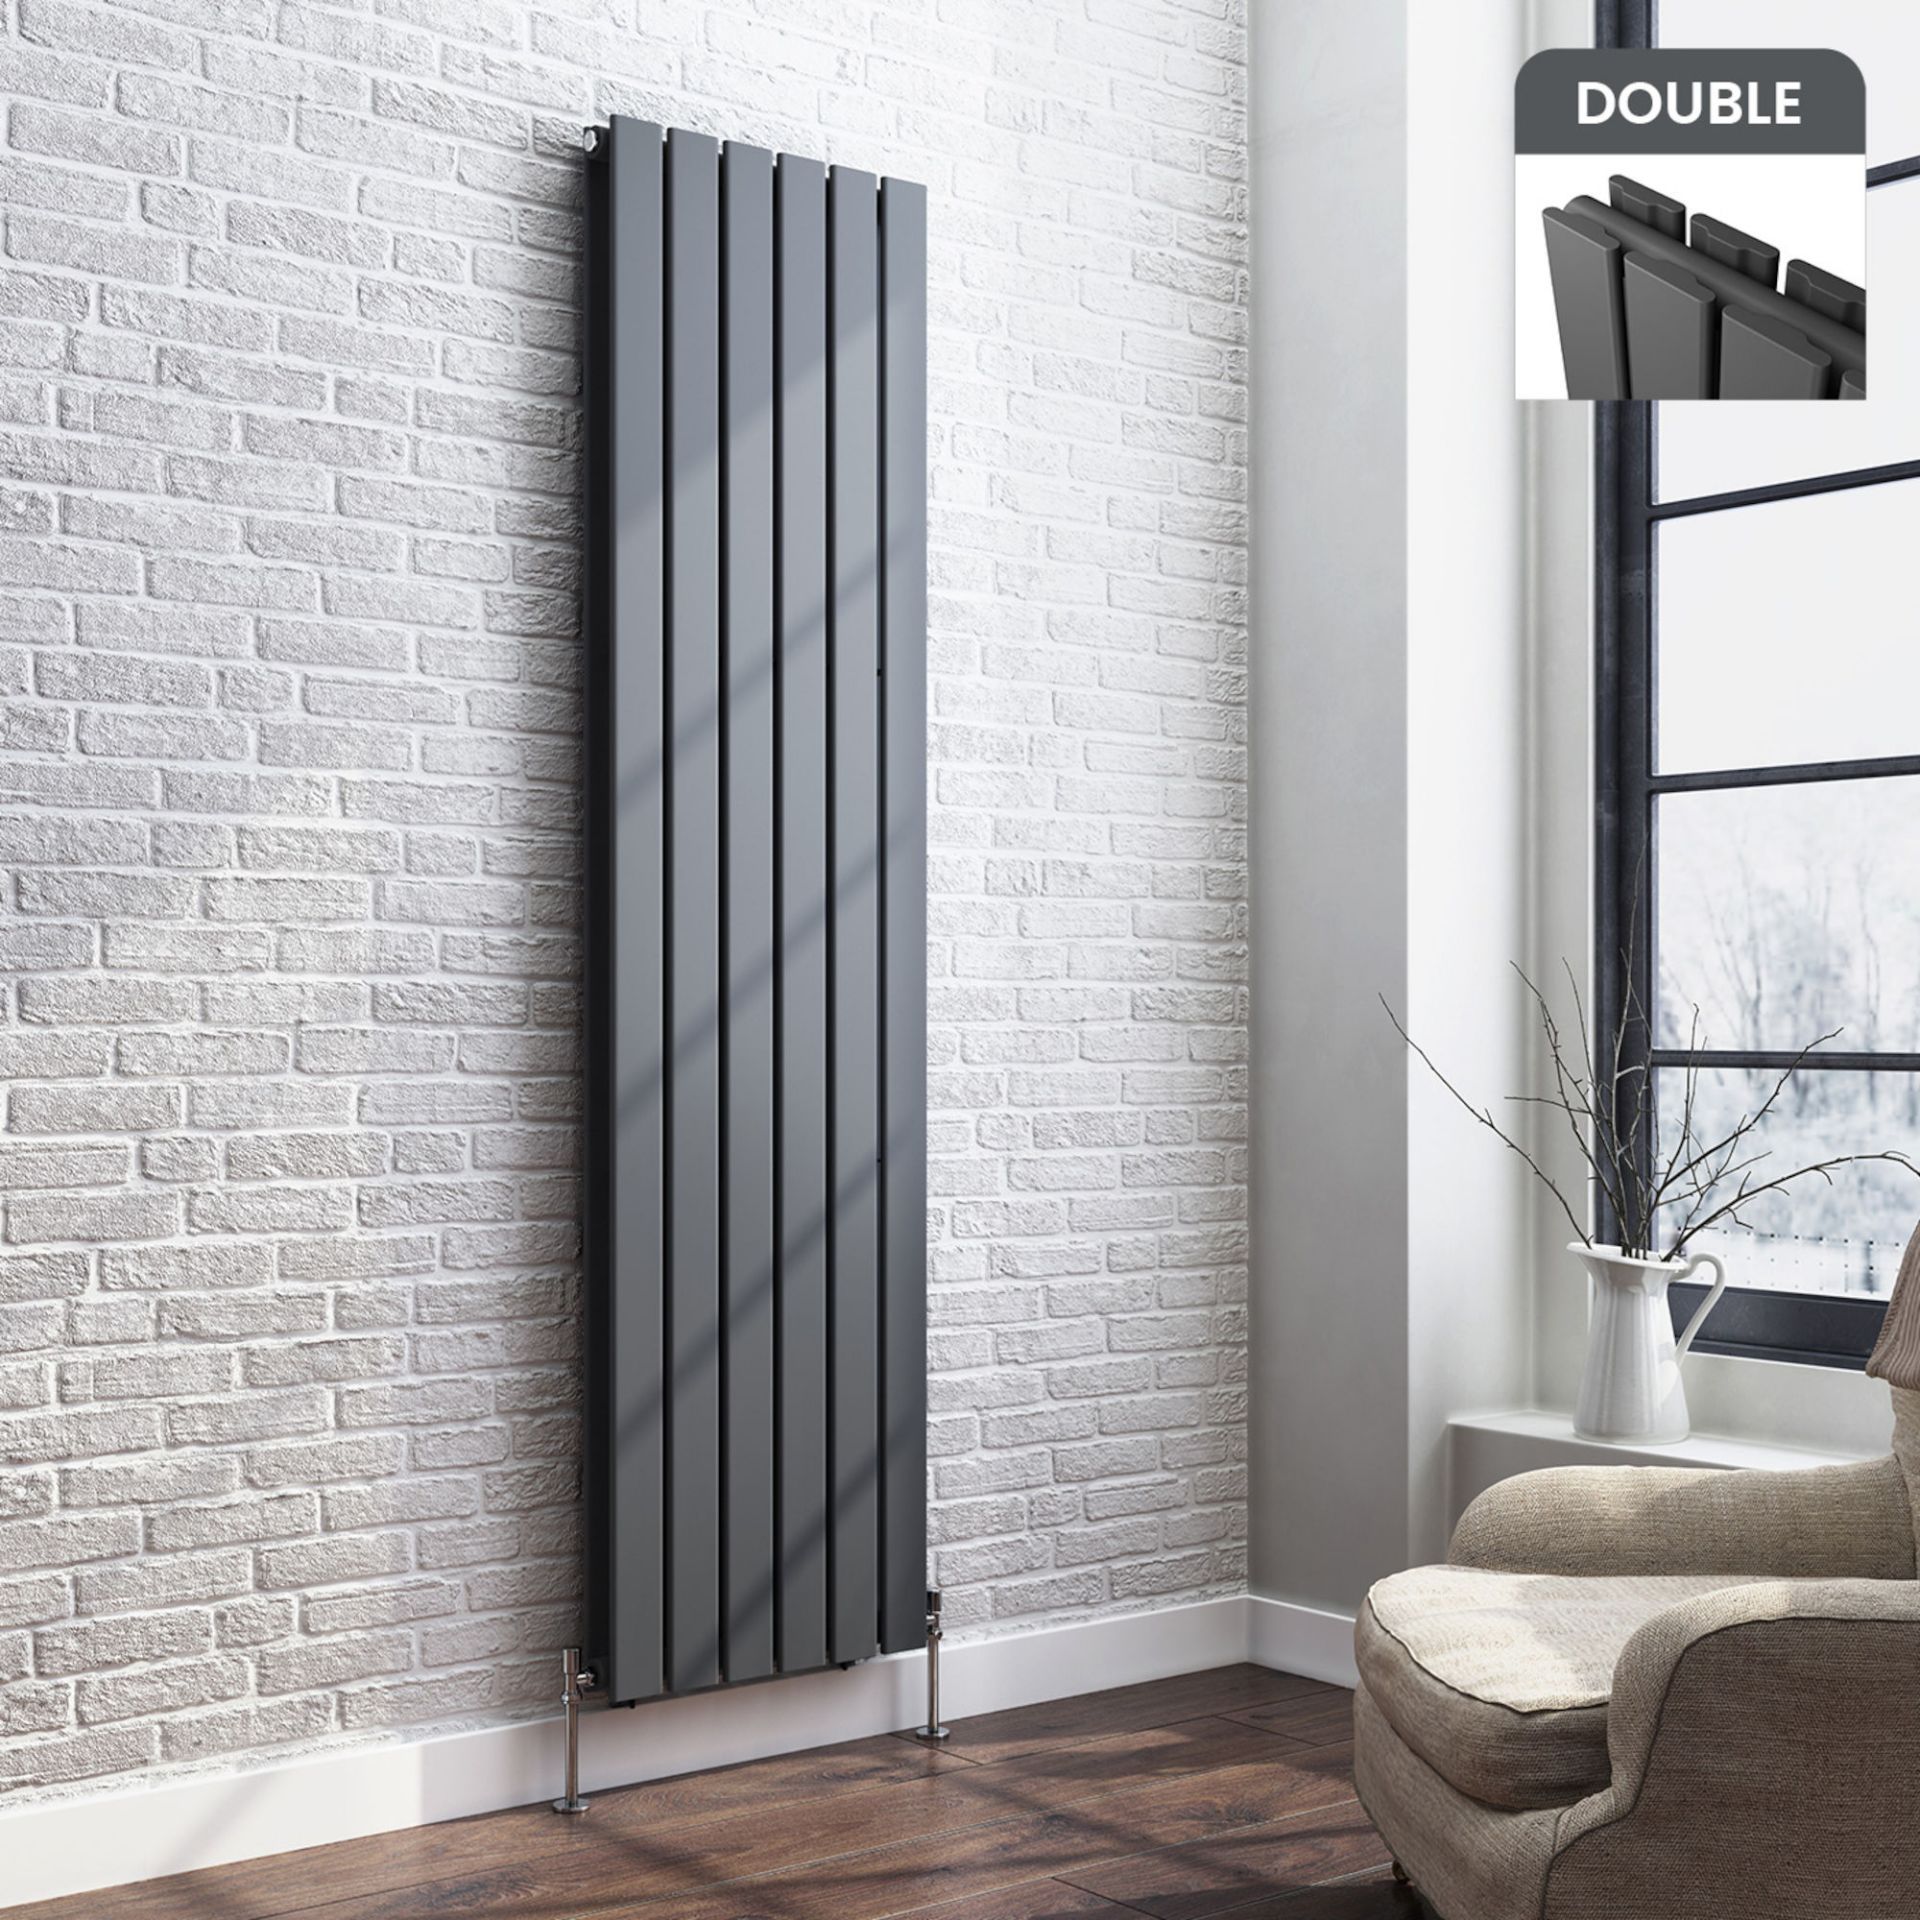 (DK31) 1800x458mm Anthracite Double Flat Panel Vertical Radiator. RRP £499.99. Made with low